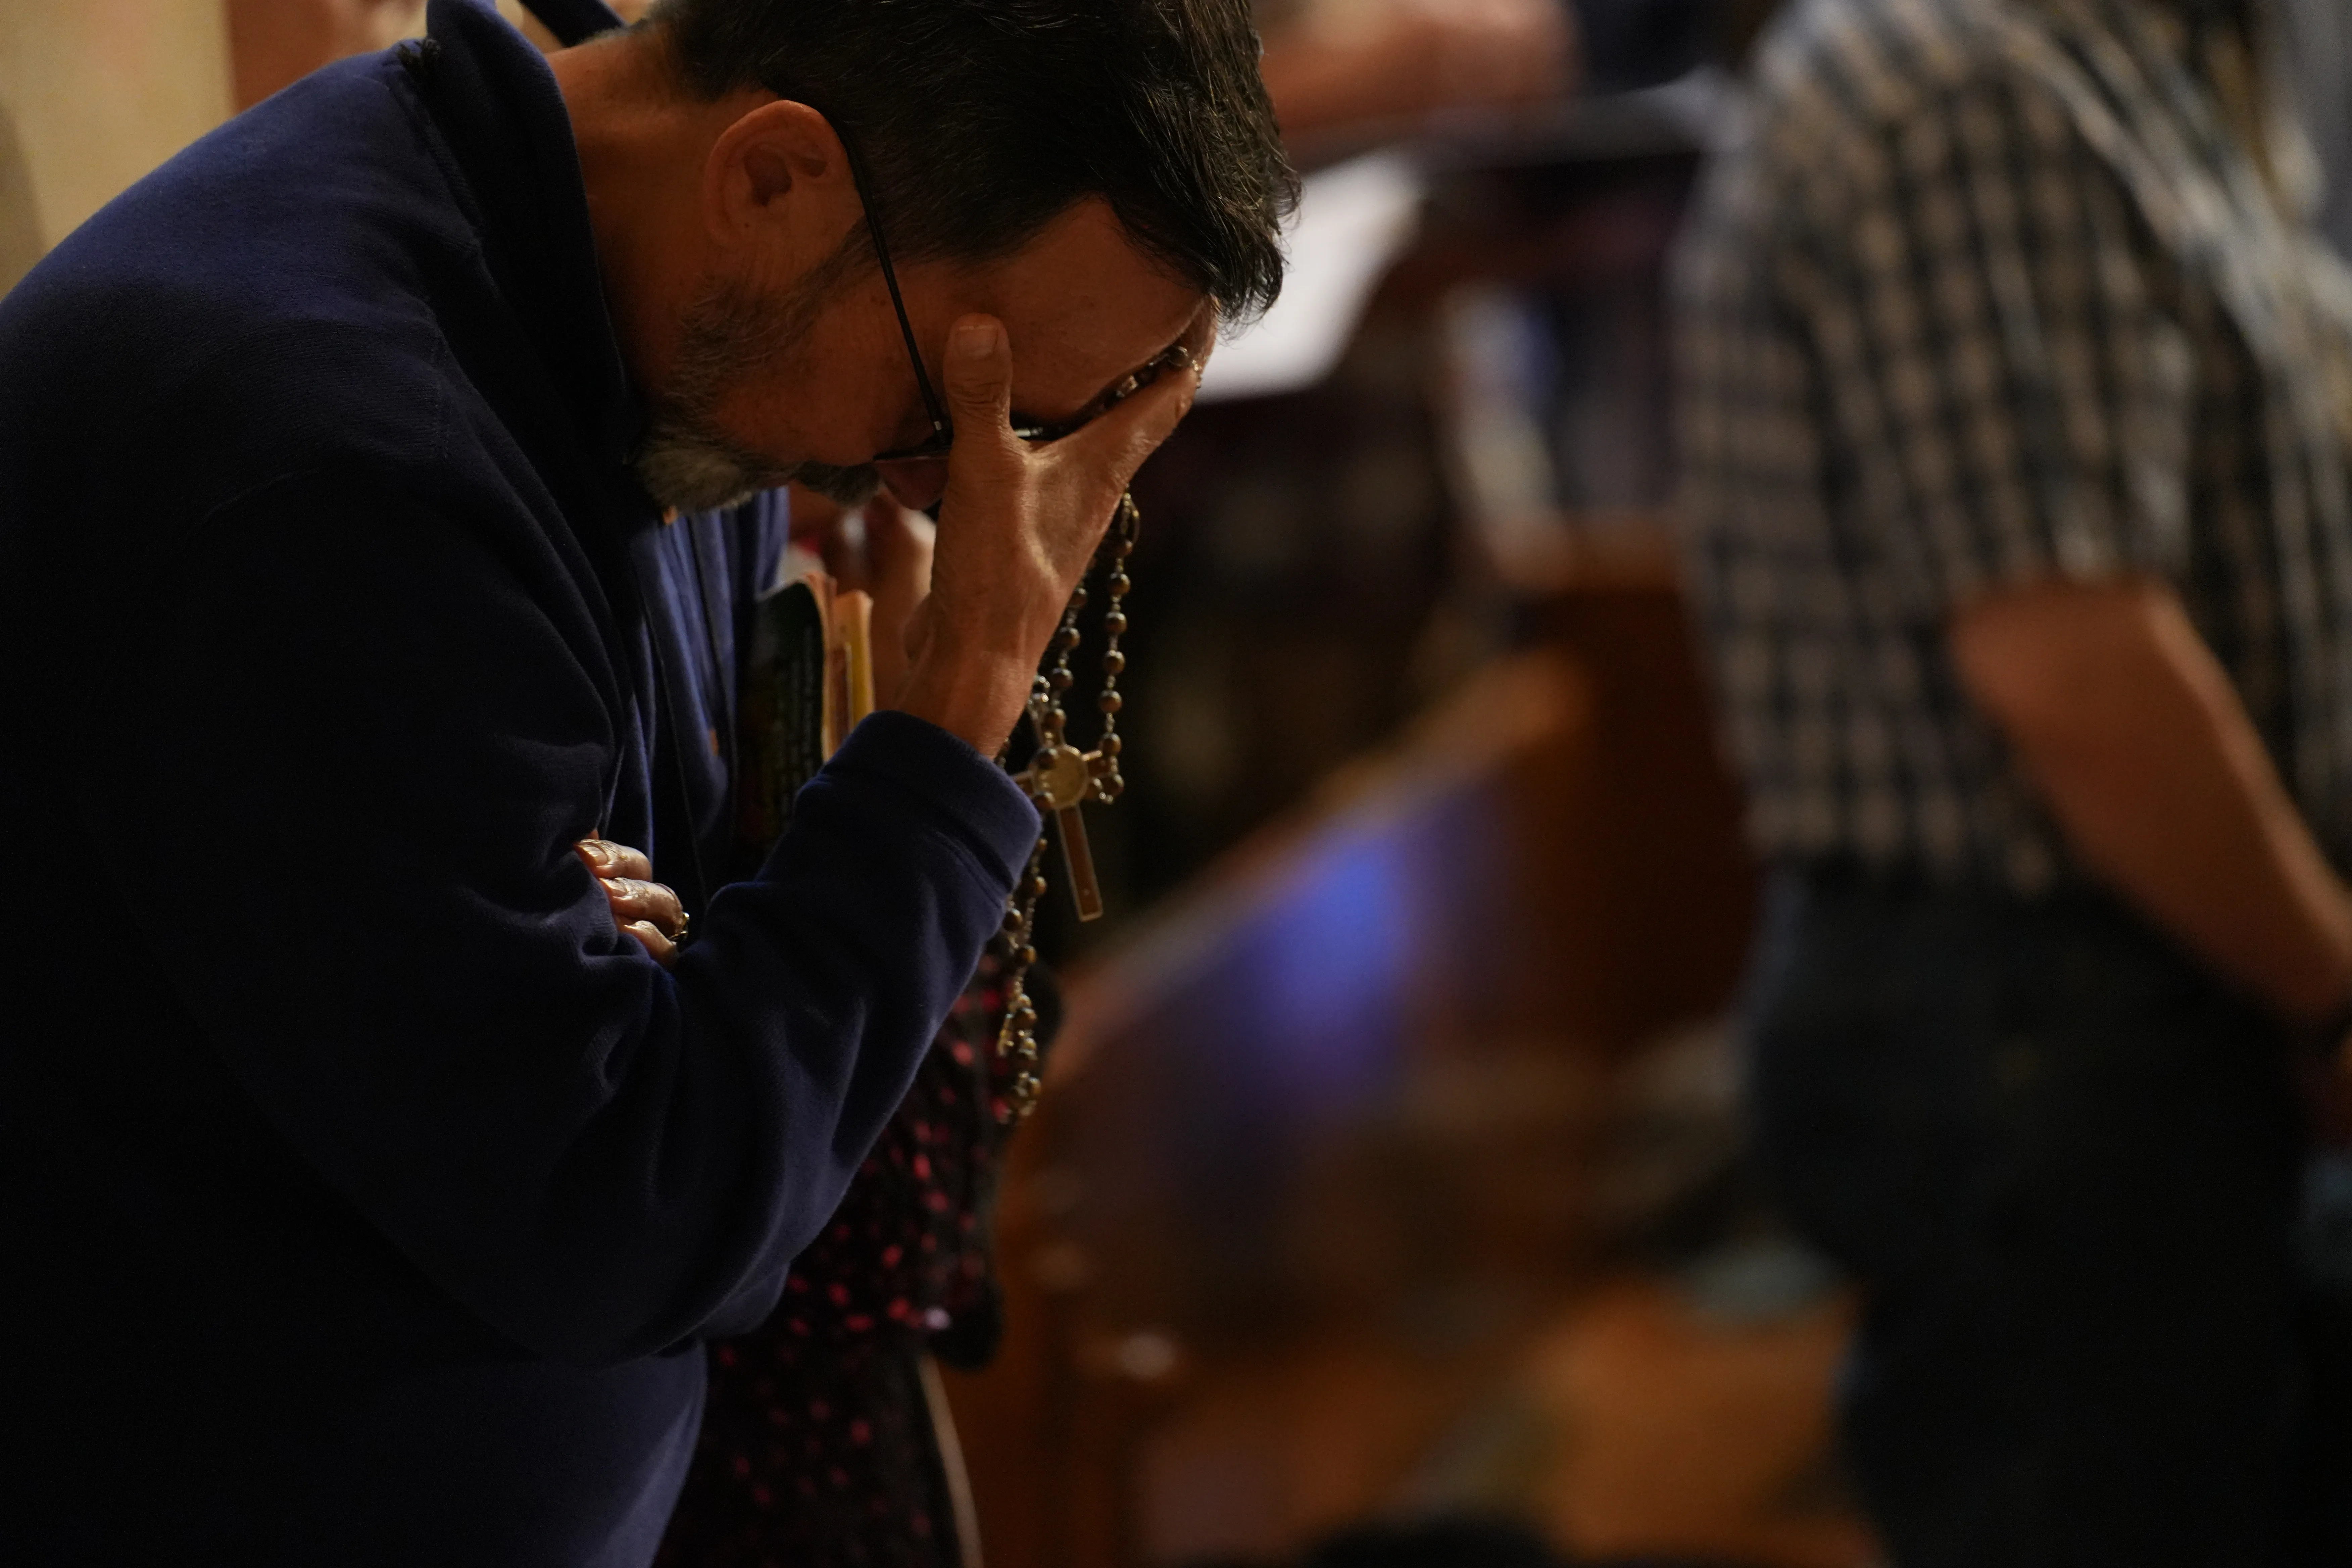 A man prays the rosary during a daylong event on Sept. 30, 2023, in Washington, D.C., focused on praying and reflecting on the rosary to conclude a nine-month rosary novena.?w=200&h=150